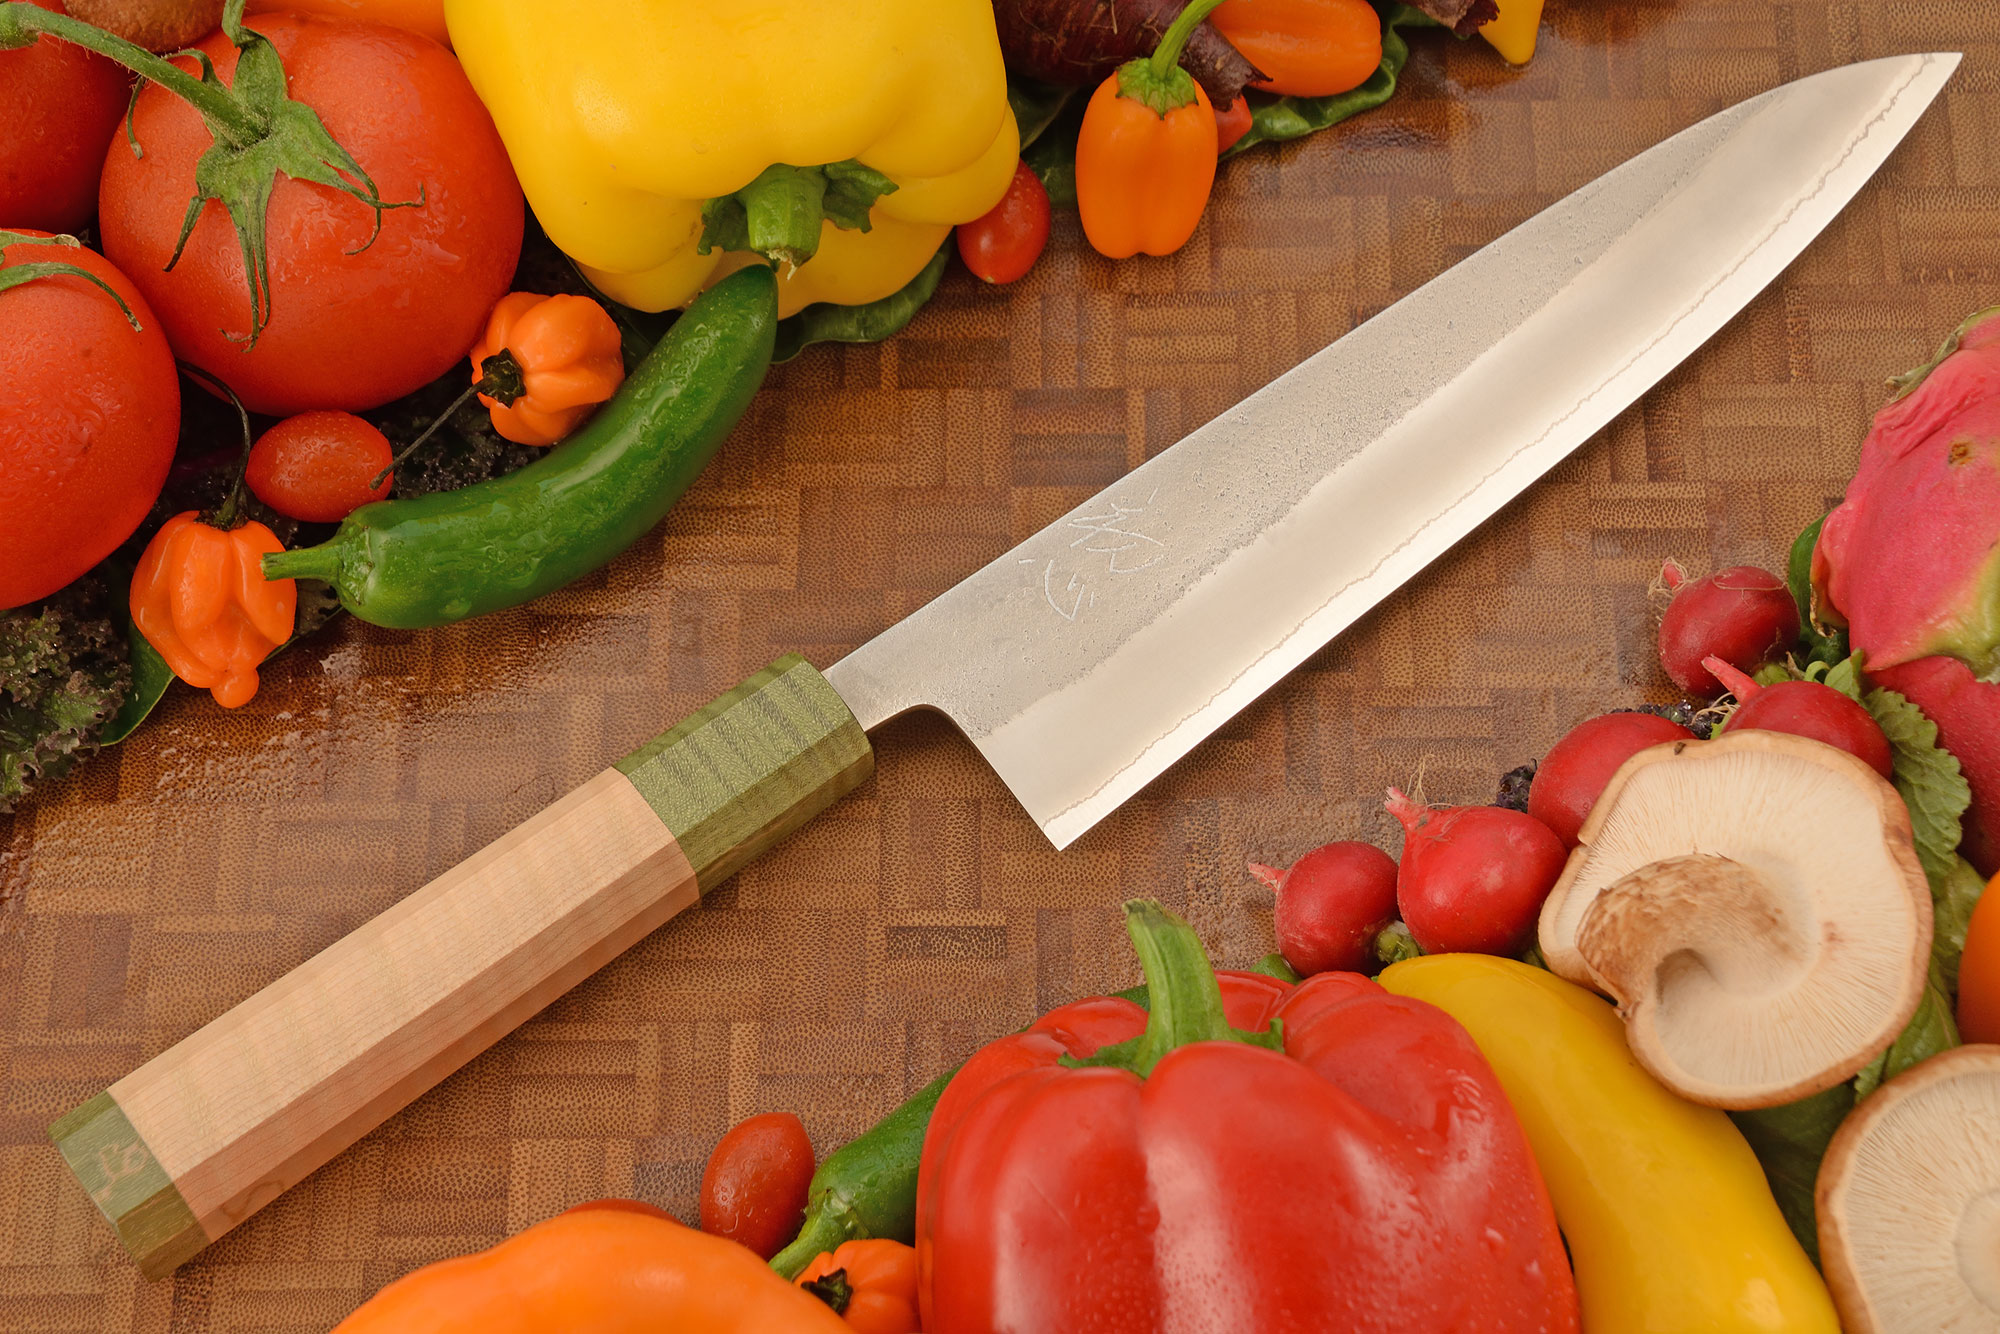 Epicurean Edge: Japanese and European professional chefs knives